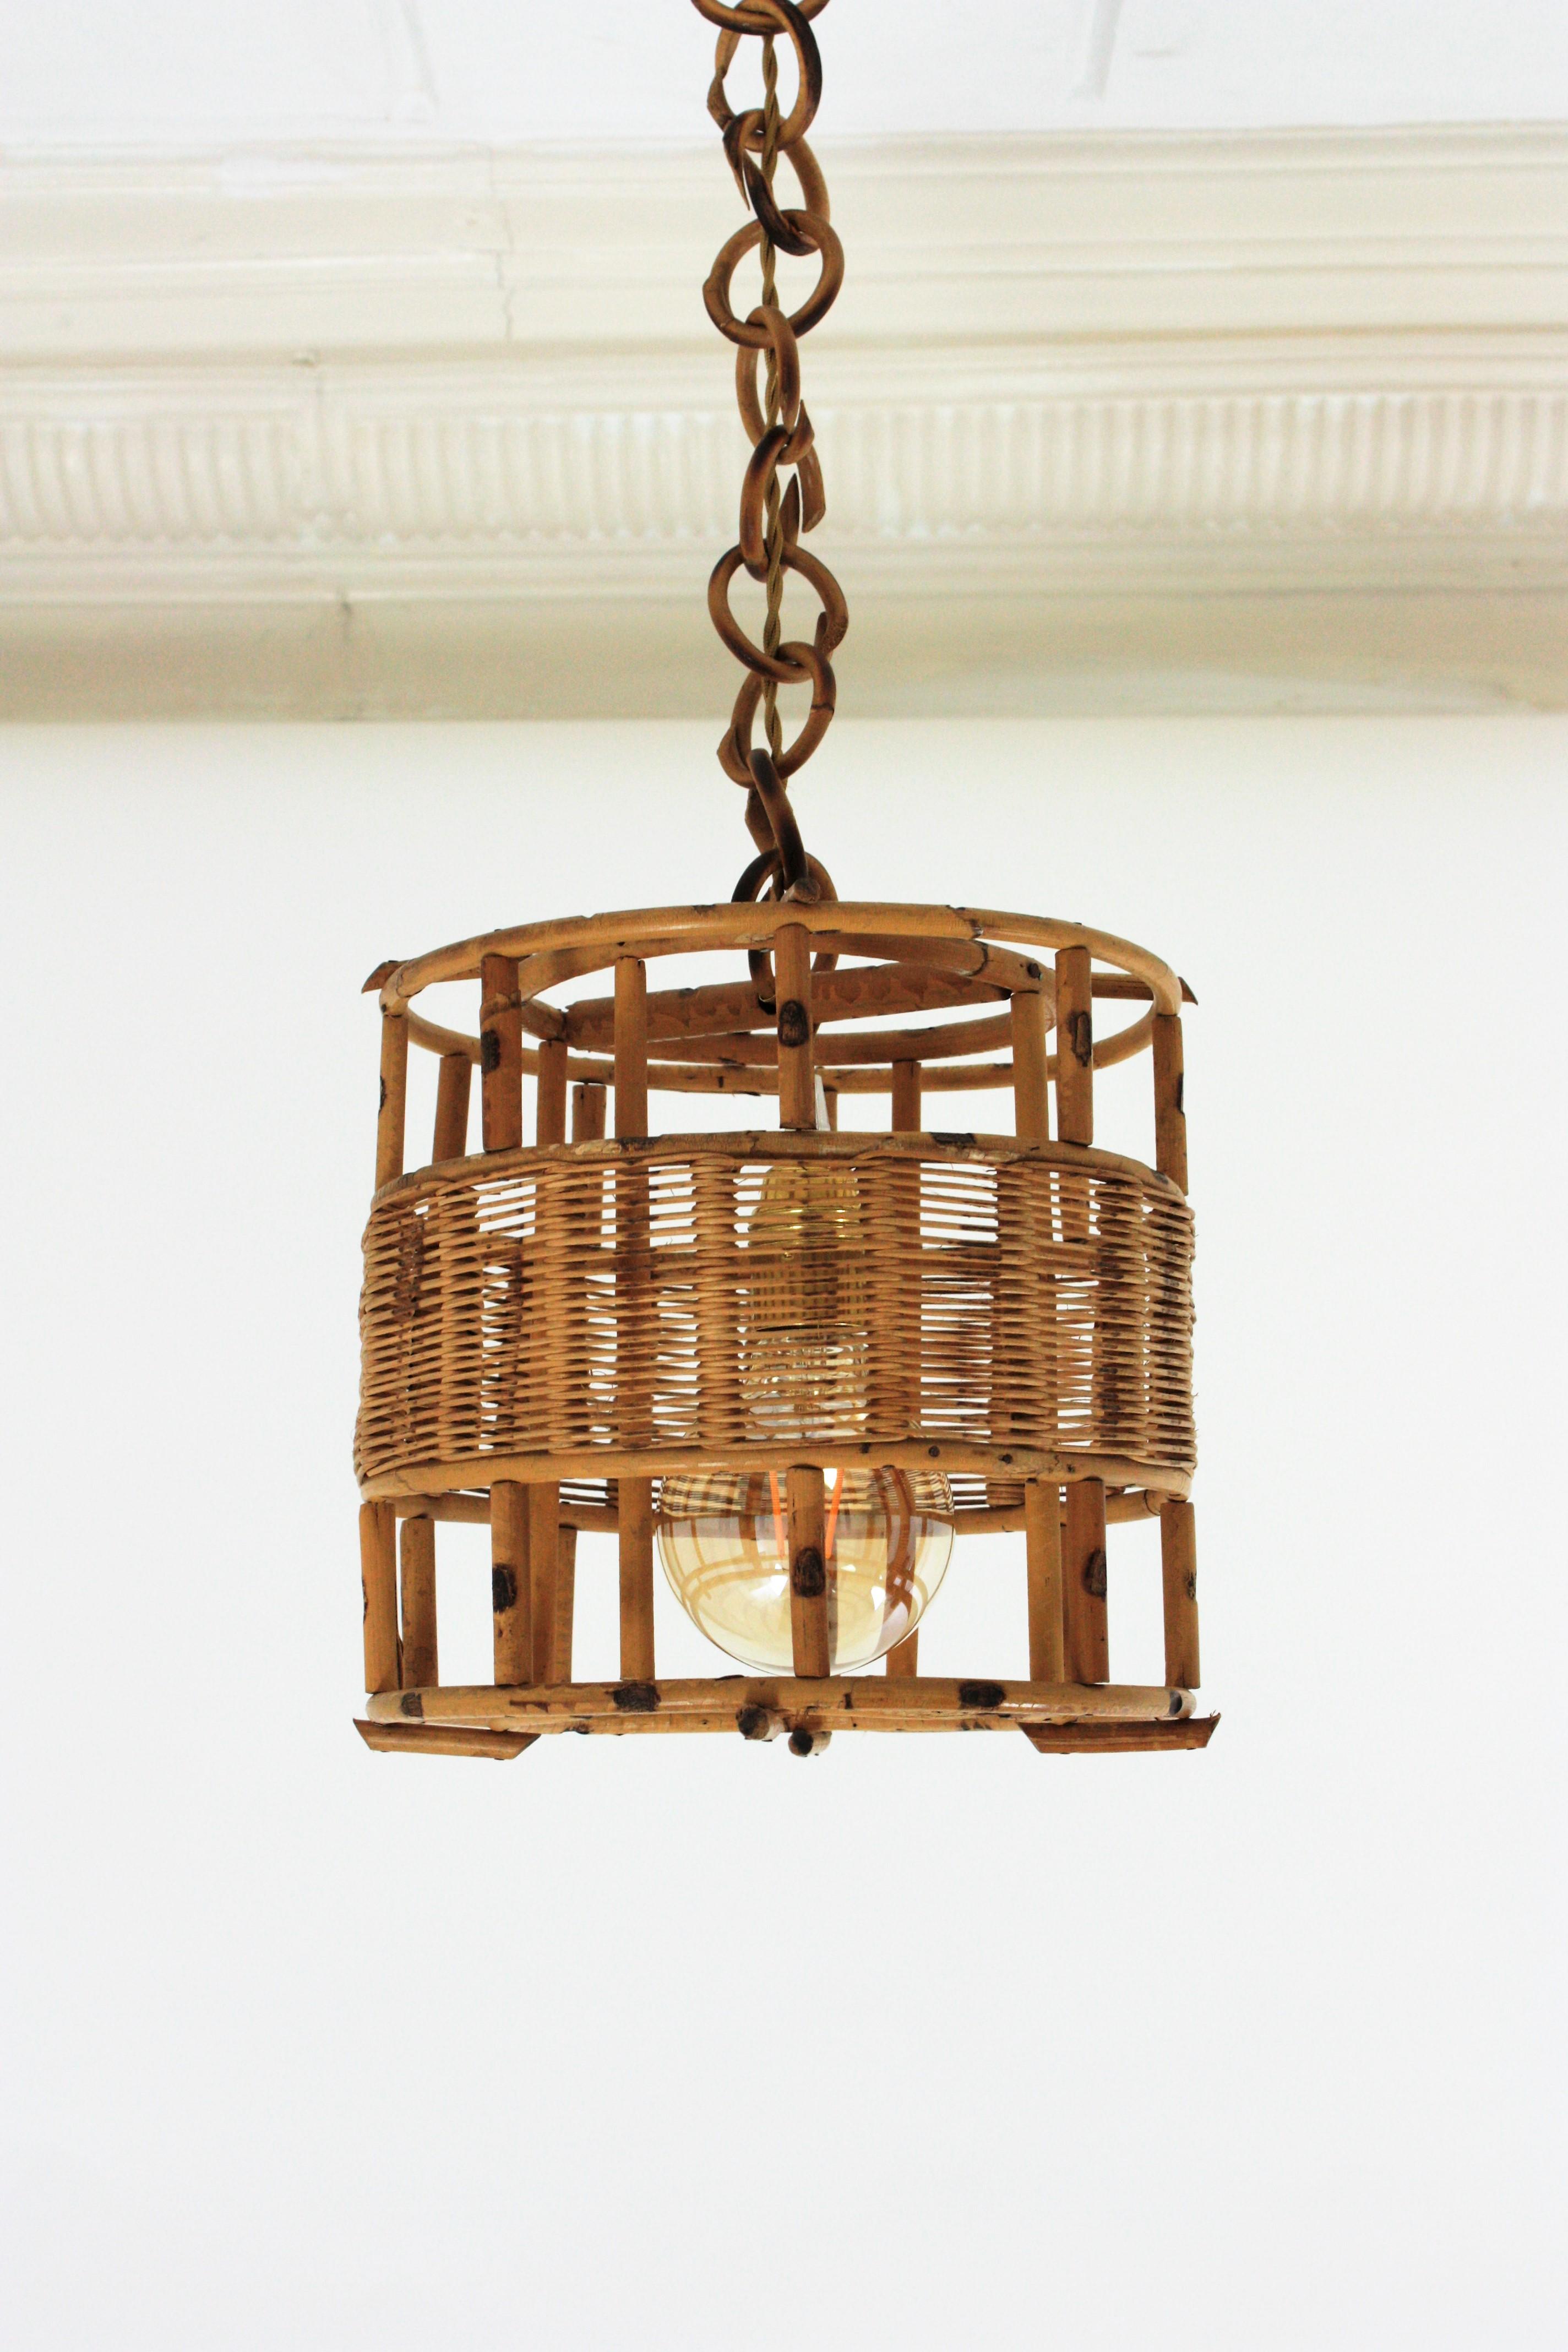 French Rattan Cylinder Pendant Light or Lantern, 1950s For Sale 1